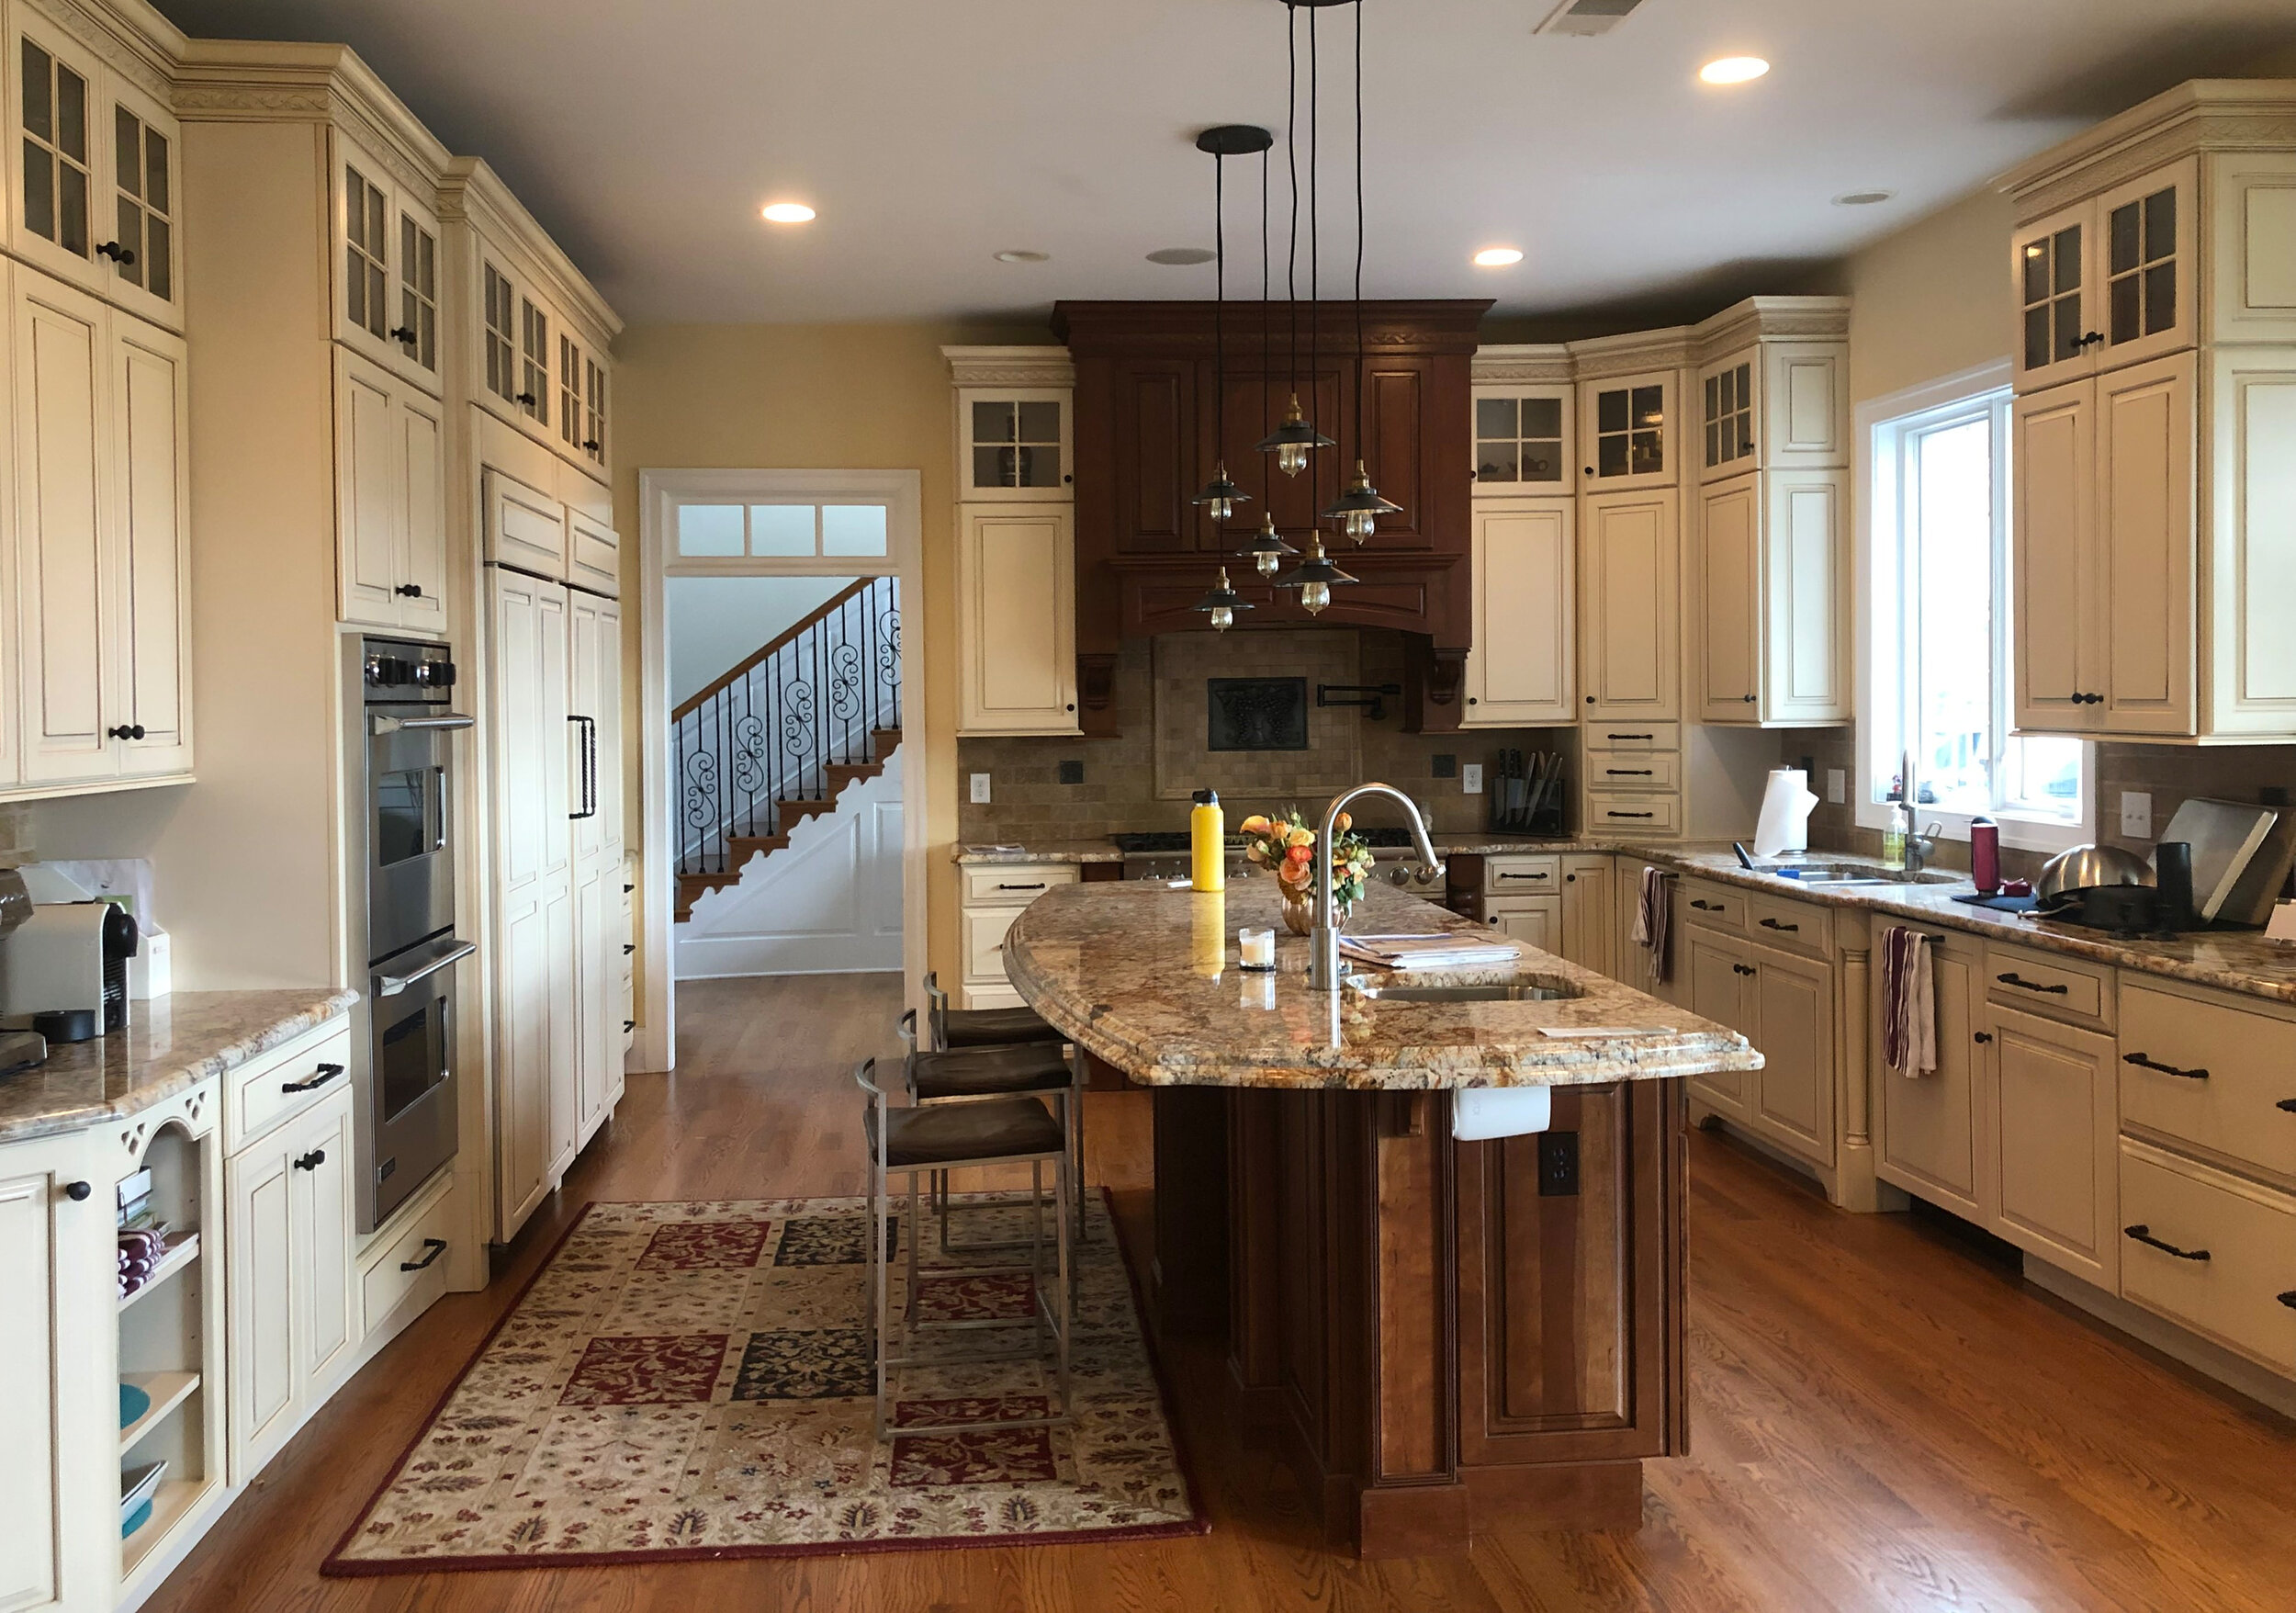  outdated kitchen, dark wood hood, cream cabinets, yellow walls 